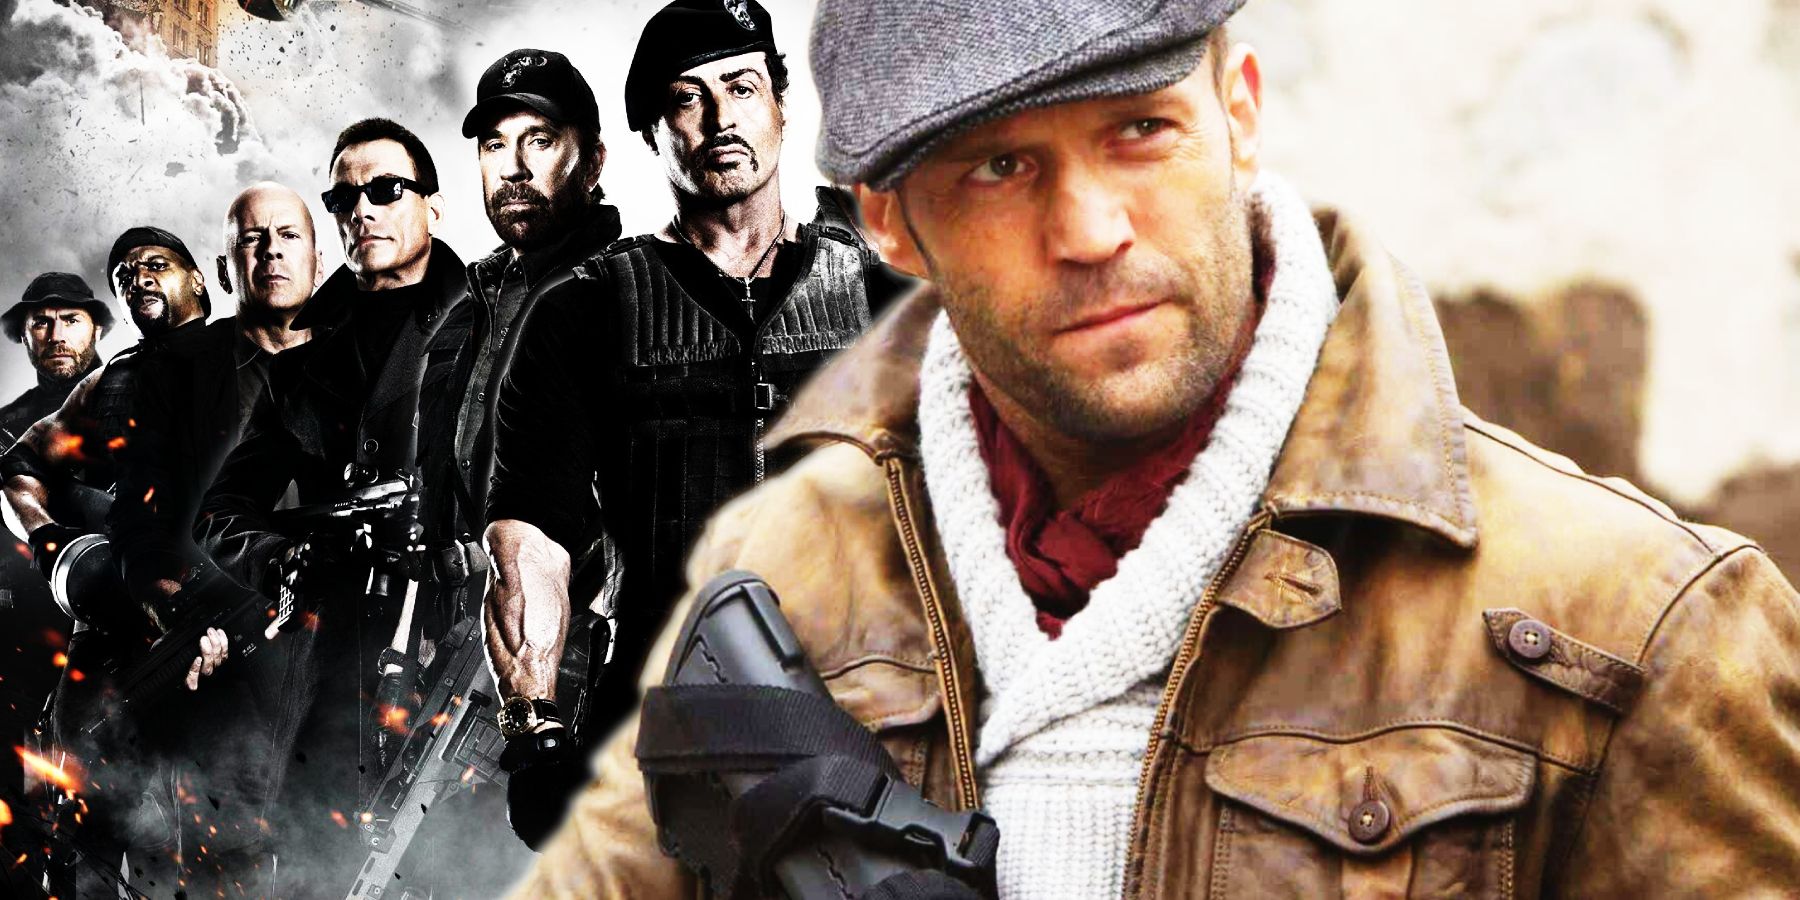 The cast of Expendables and Jason Statham as Lee Christmas